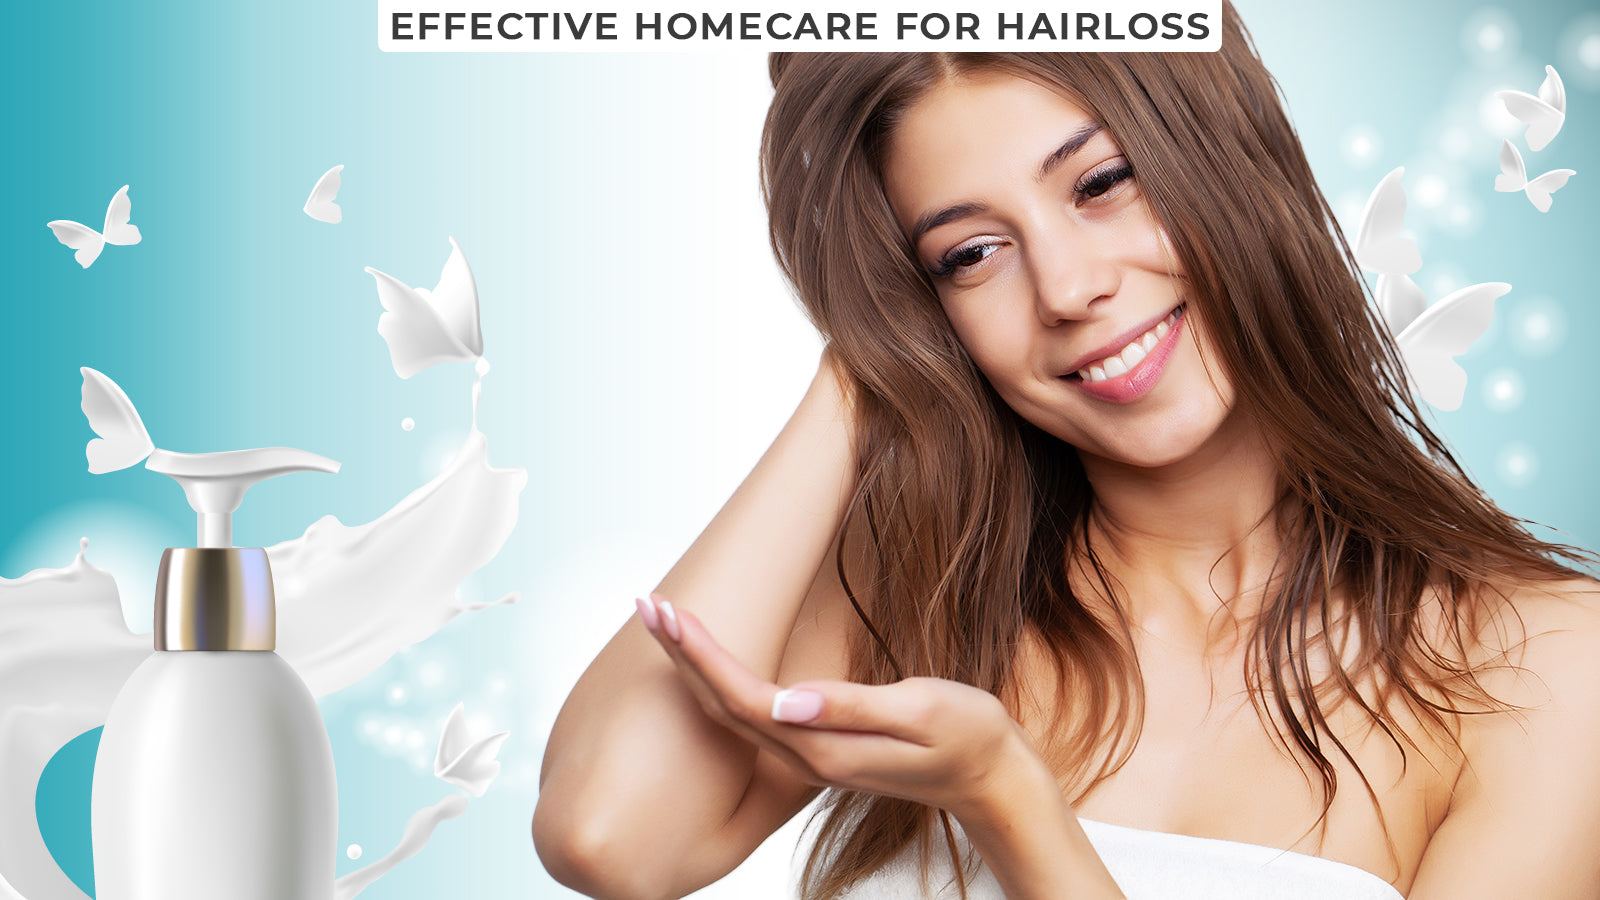 Effective Homecare for Hairloss